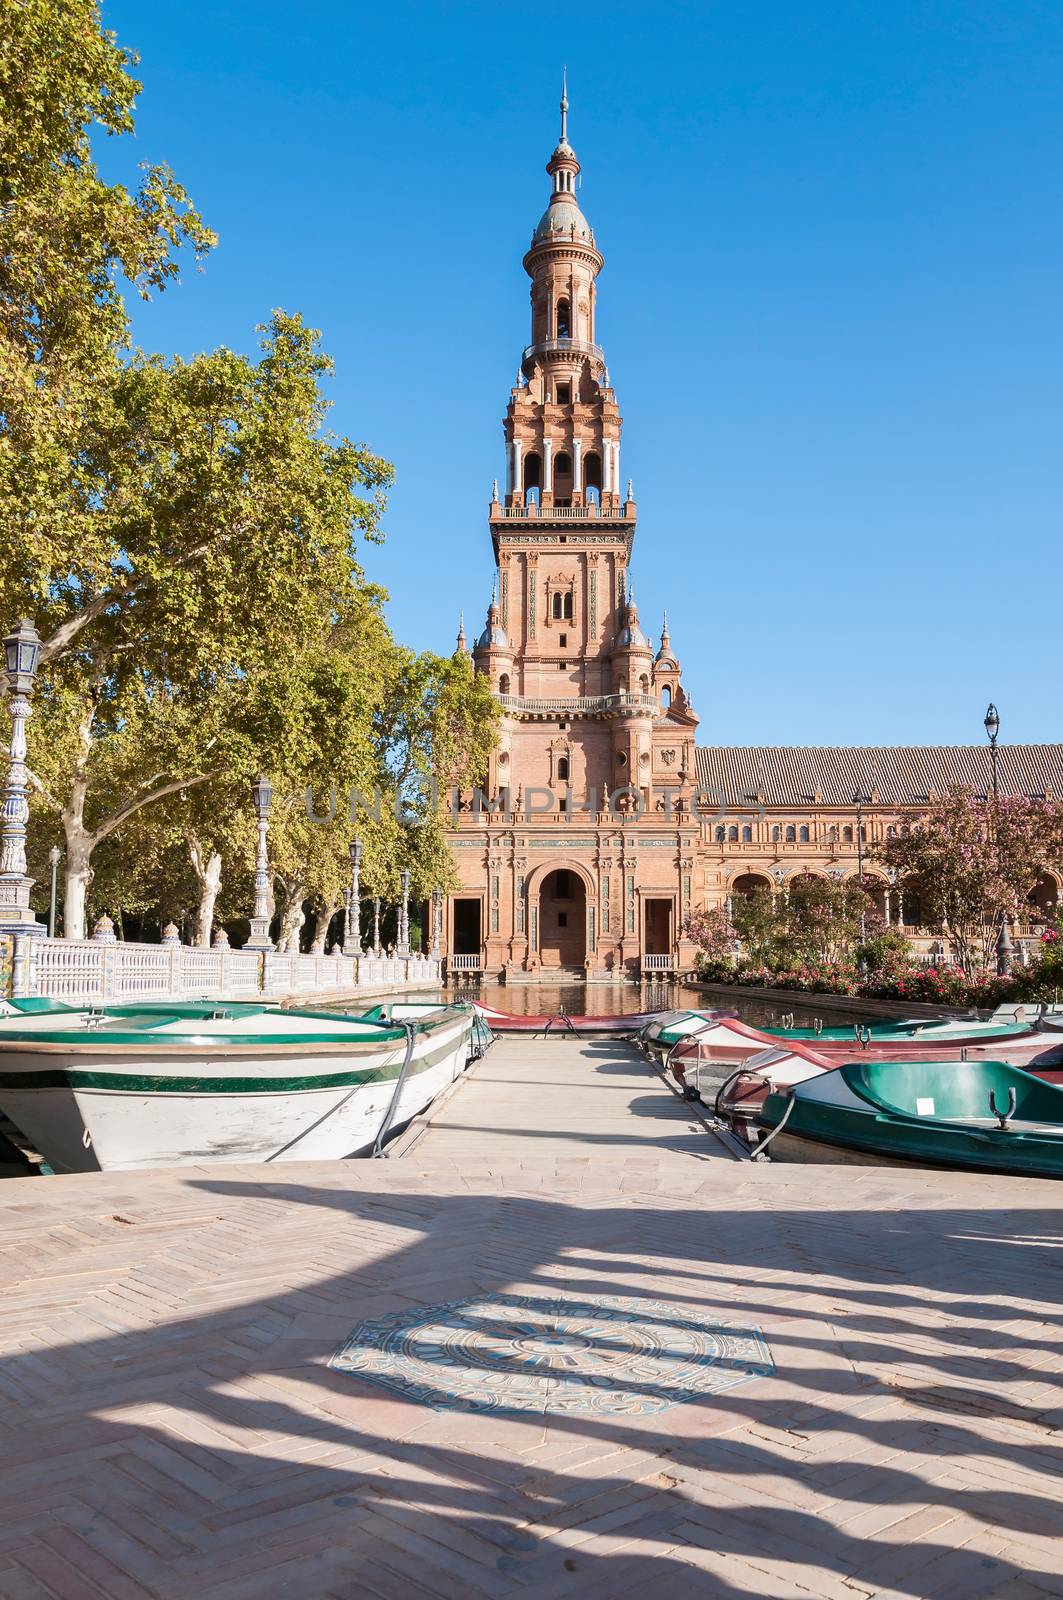 Boats at the tower of the Plaza de Espana in Seville